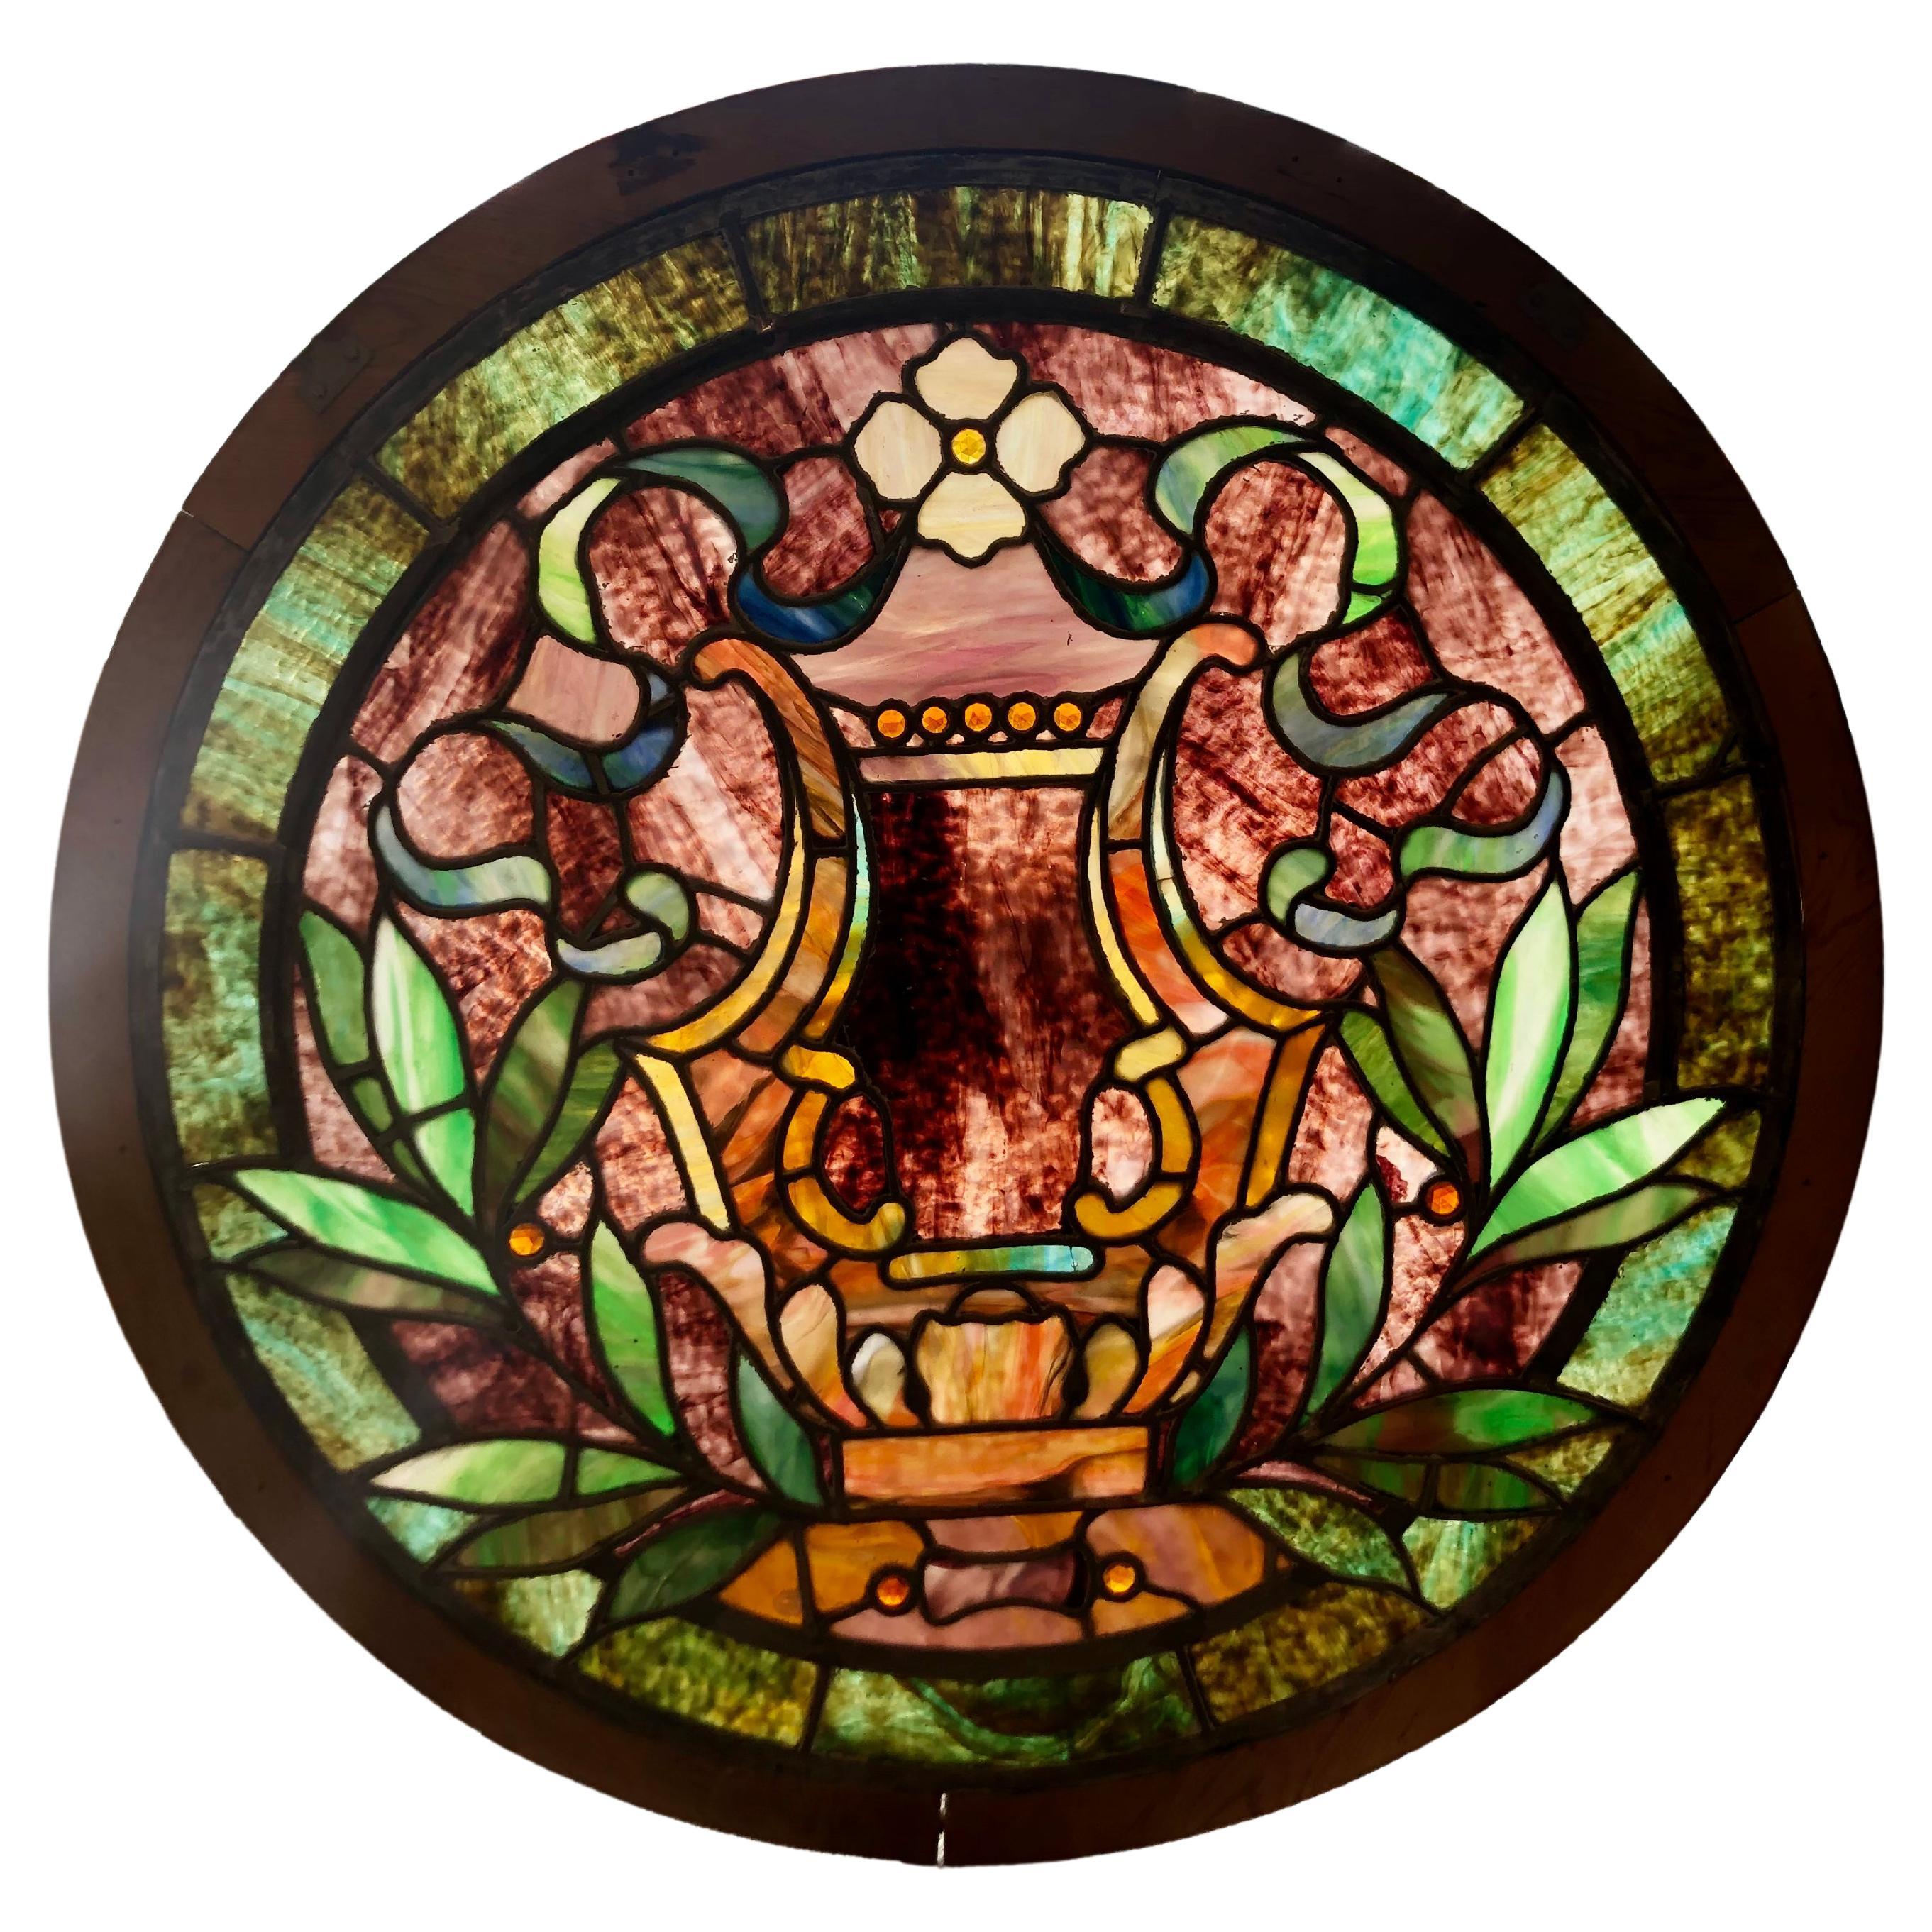 Late 19th Century Antique Round Stained Glass Window in a Wood Frame